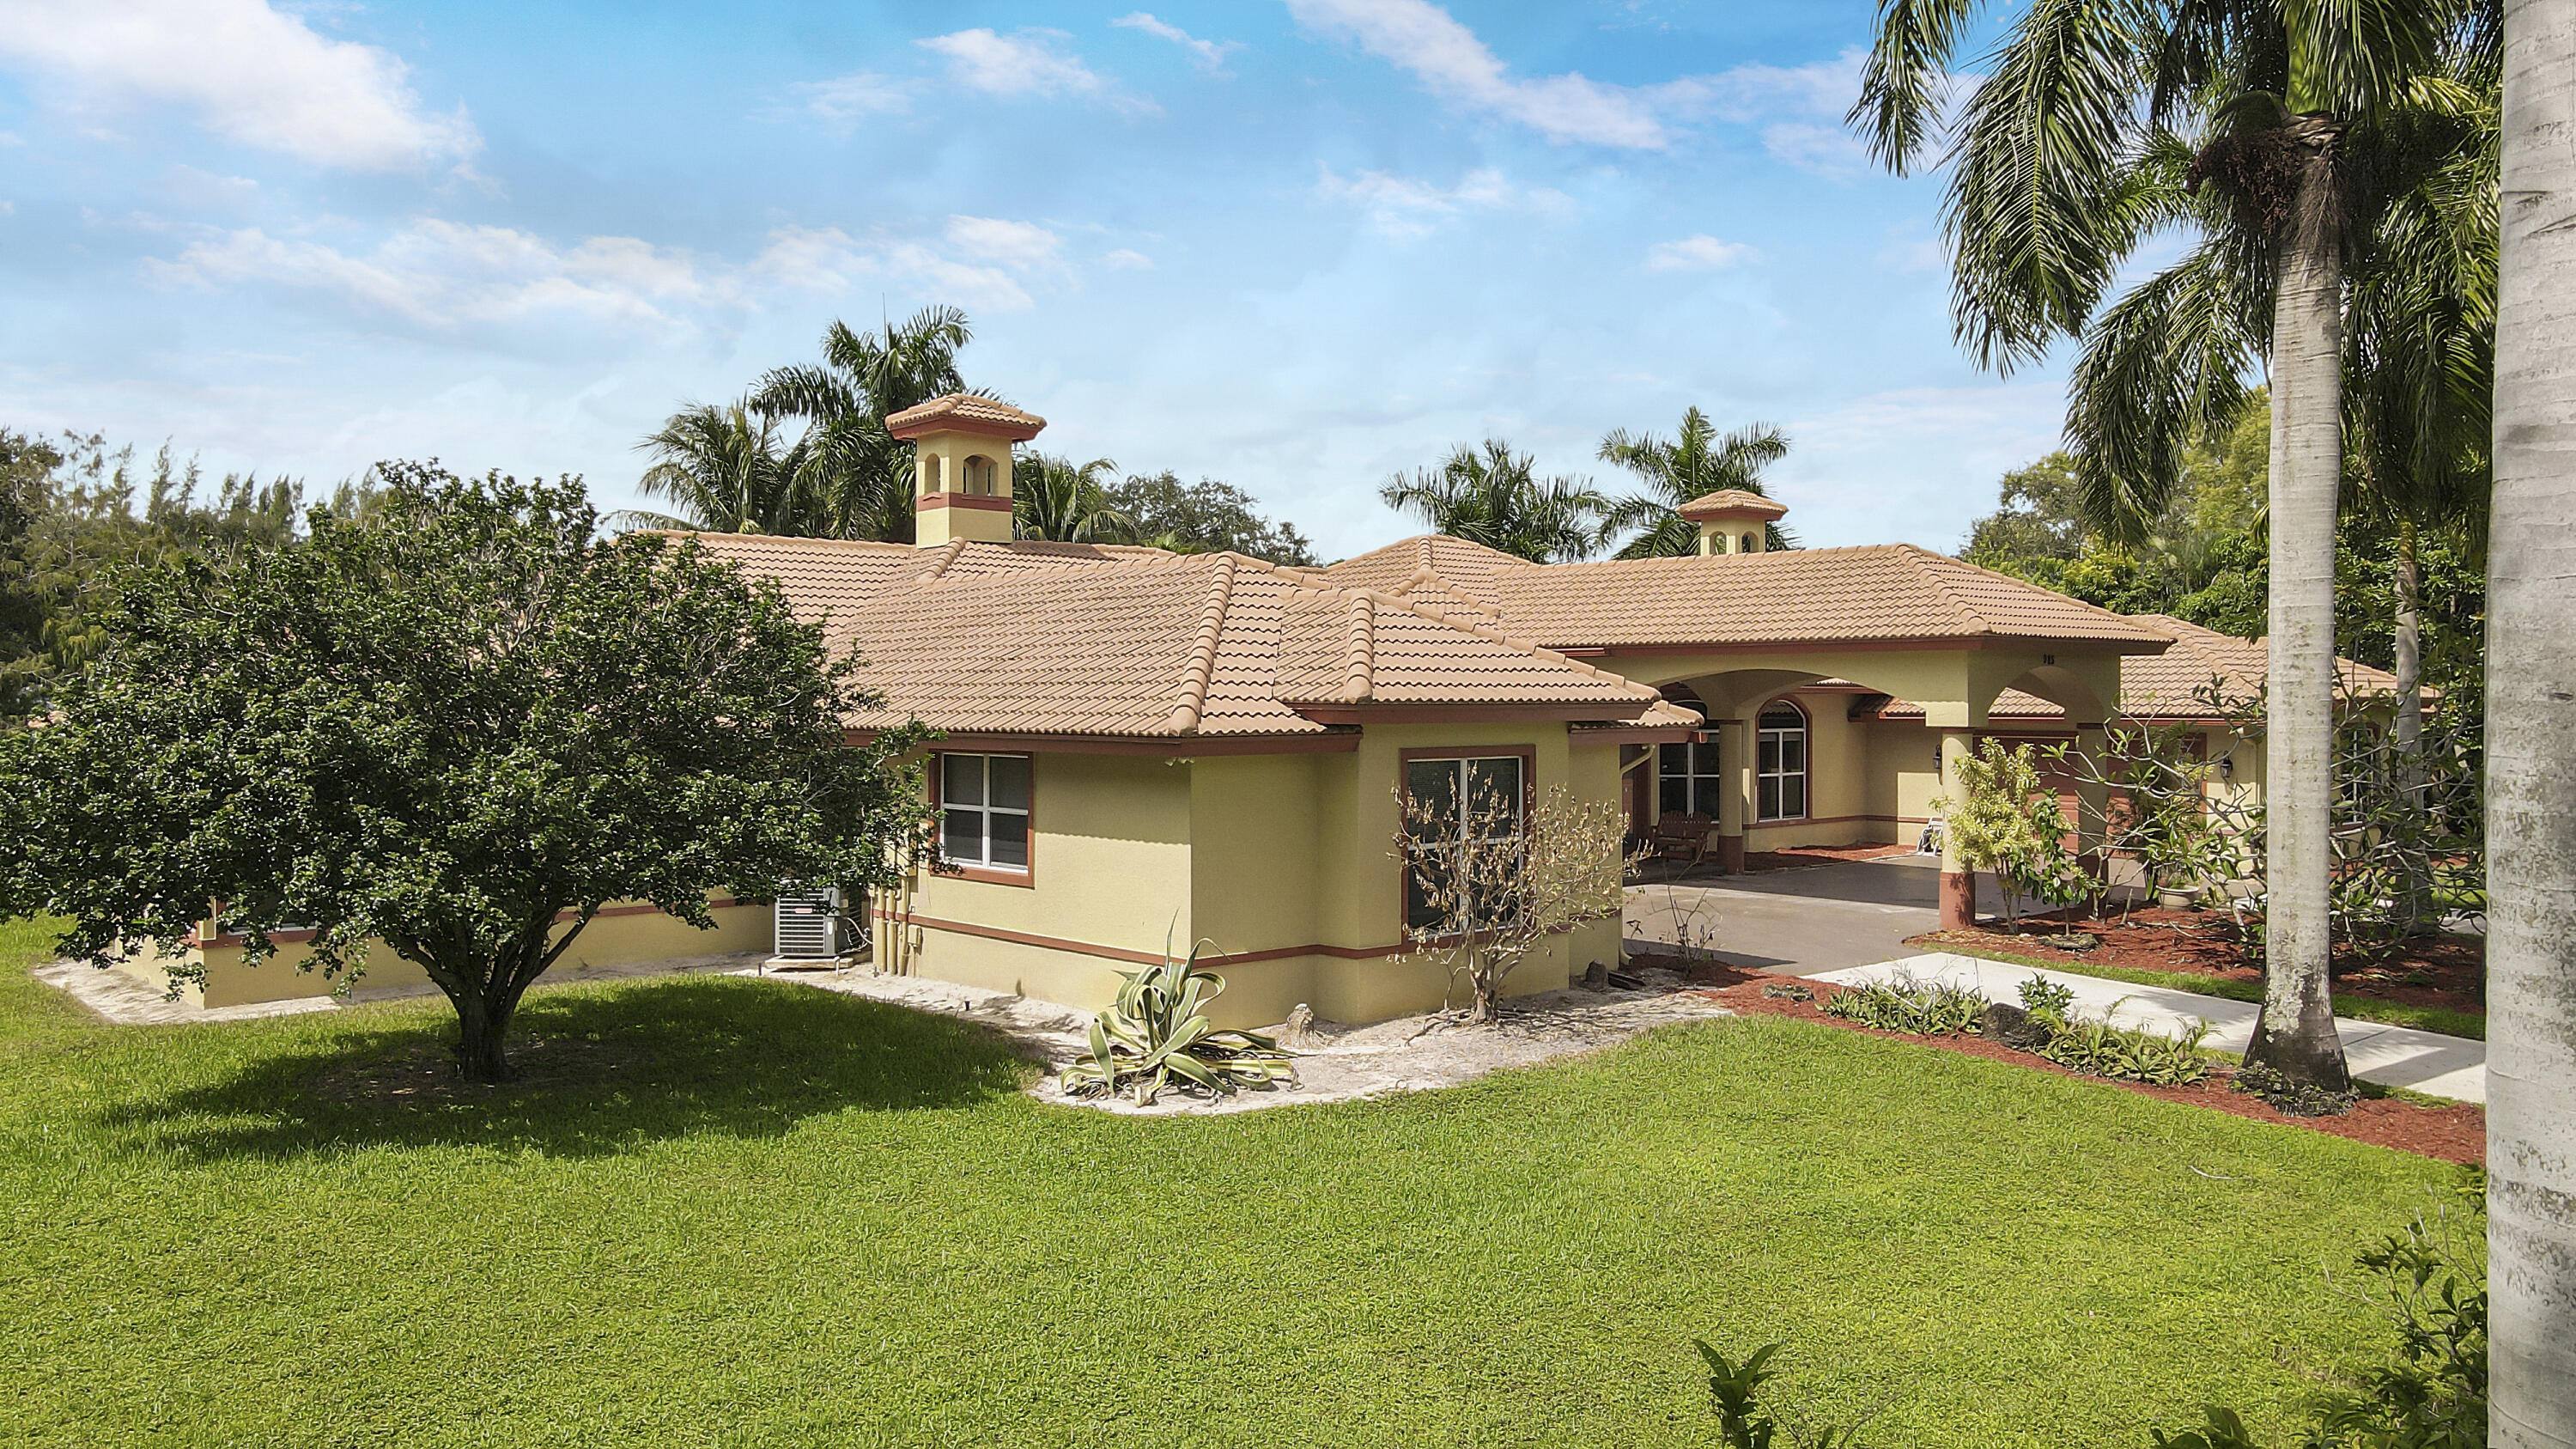 985 Whippoorwill Isle, West Palm Beach, Palm Beach County, Florida - 6 Bedrooms  
4 Bathrooms - 